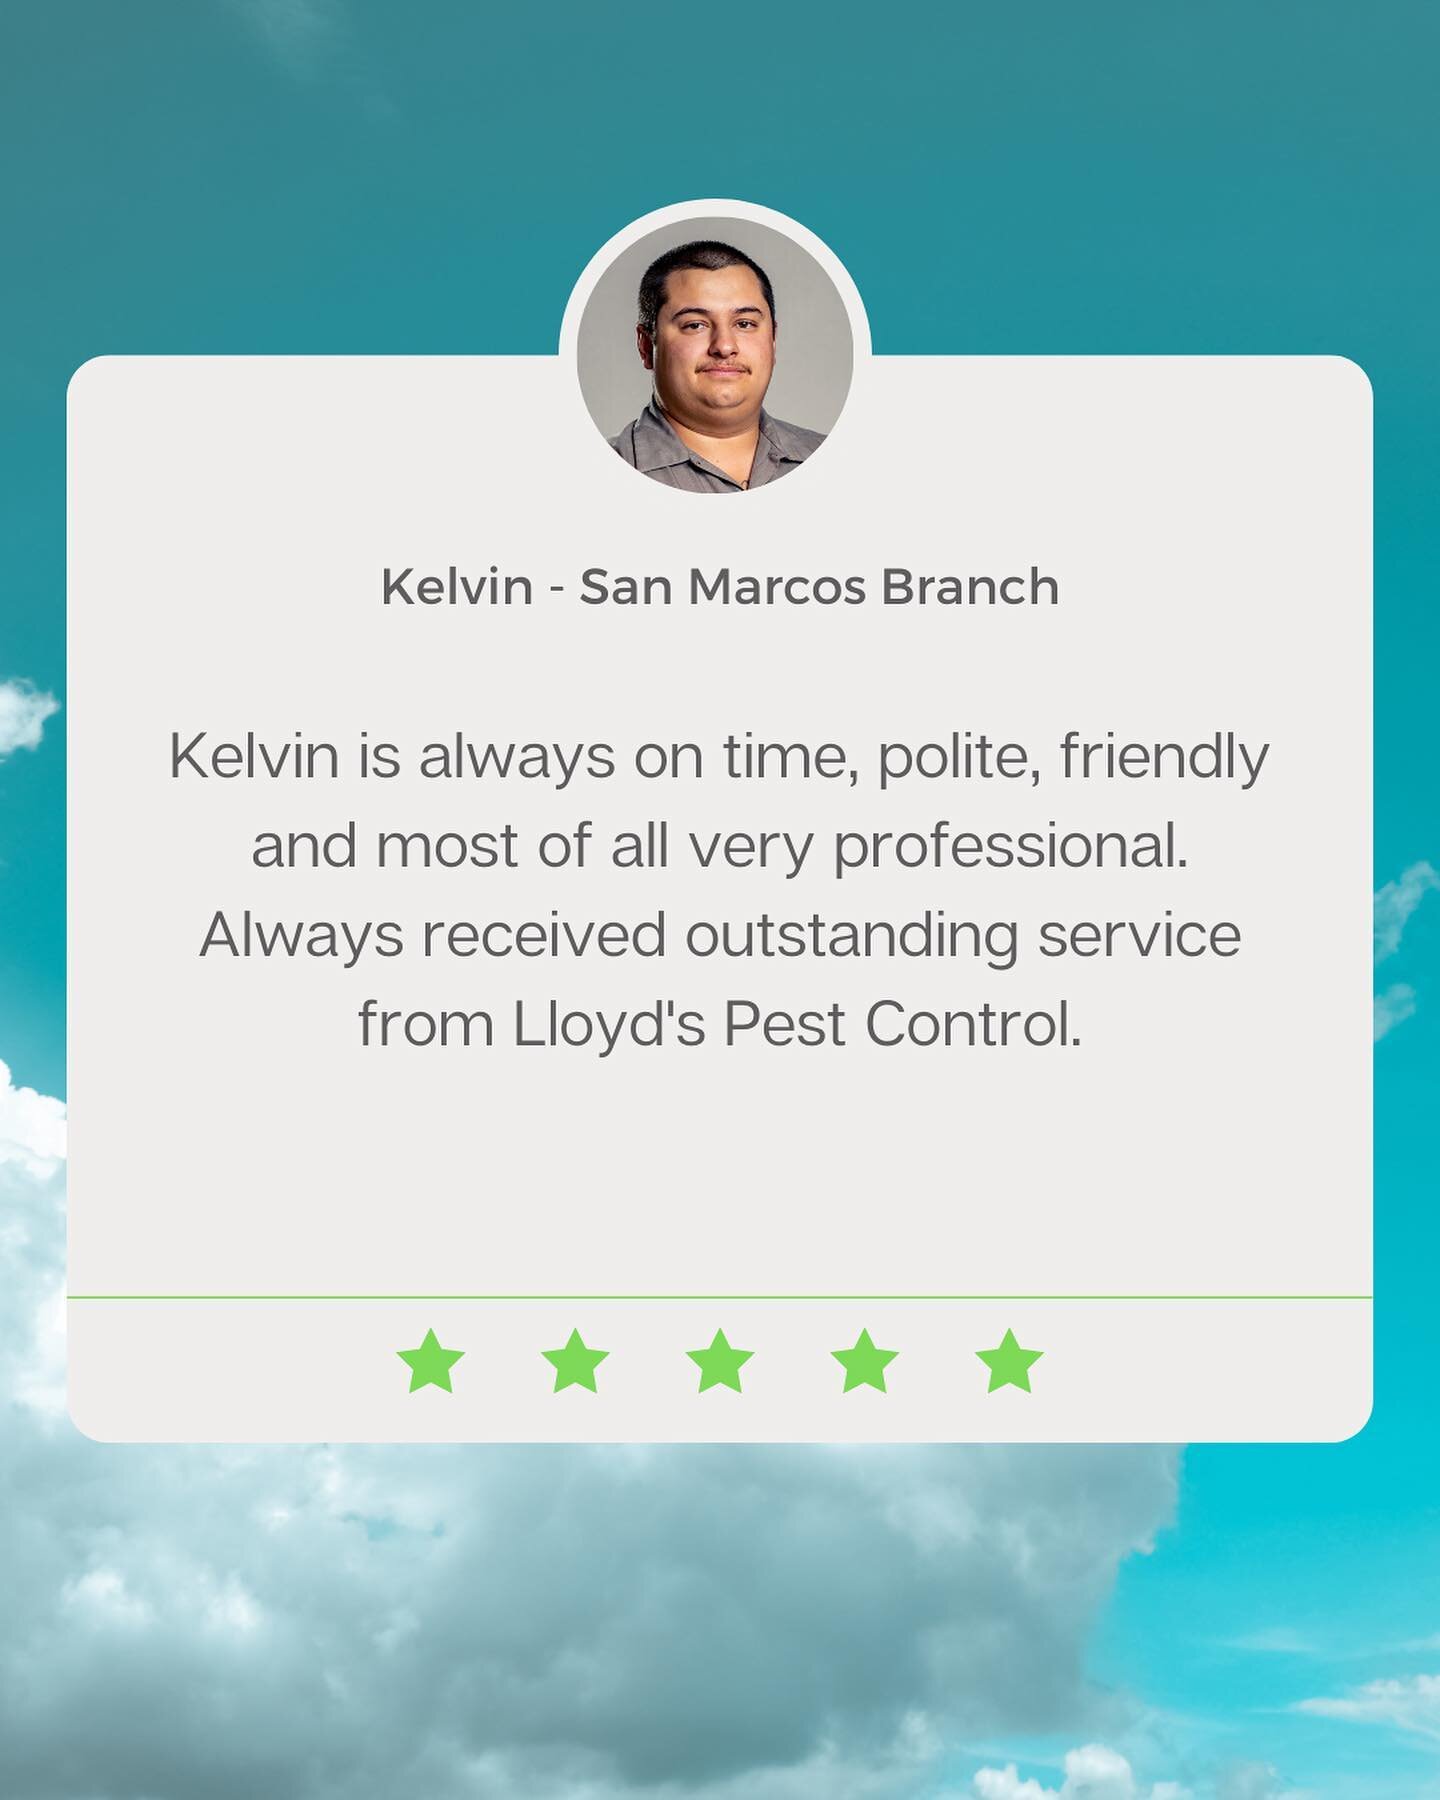 Another great start to the week! Our team members know how to deliver top notch customer service. #customerservice #pestcontrol #pestcontrolcareers #nowhiring #sandiego #elcajon